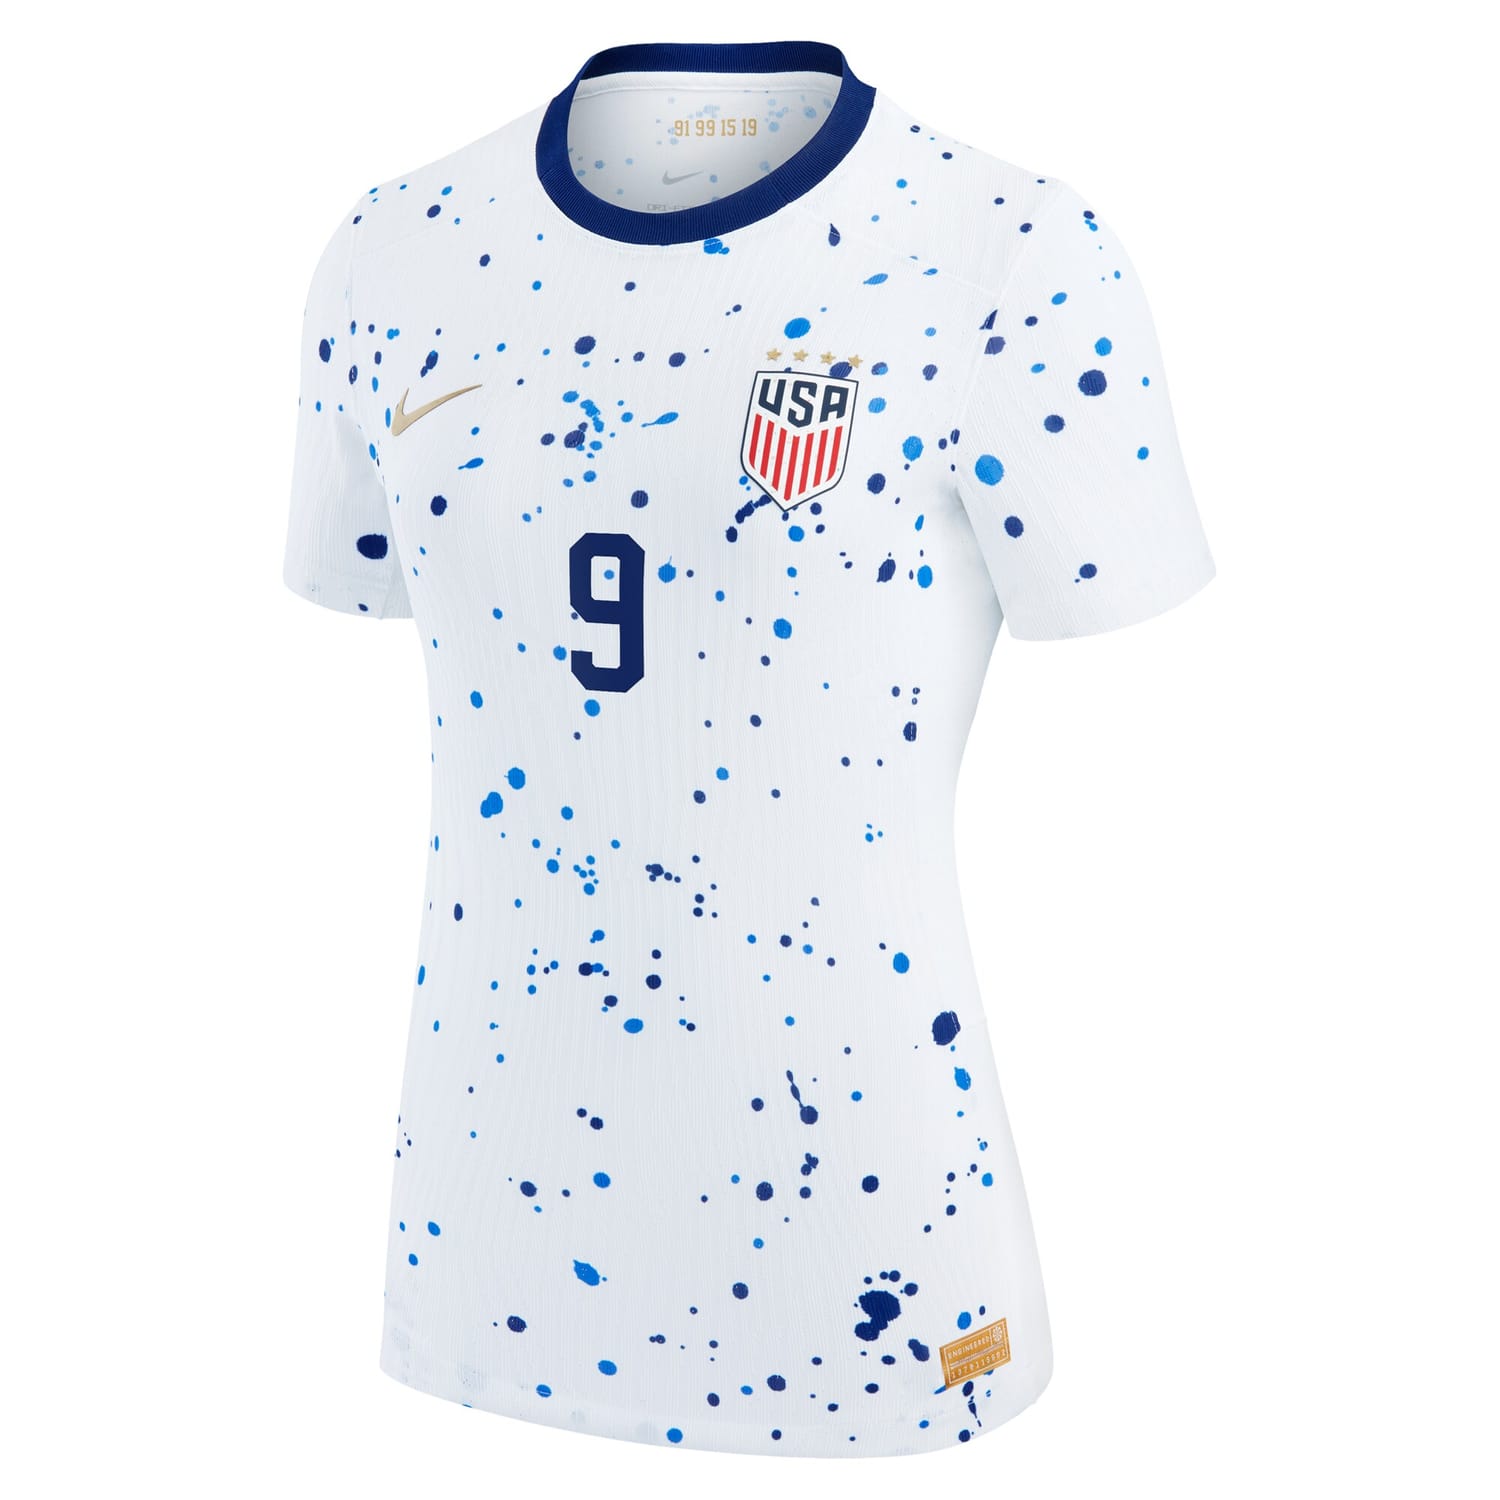 USWNT Home Authentic Jersey Shirt White 2023 player Mallory Swanson printing for Women